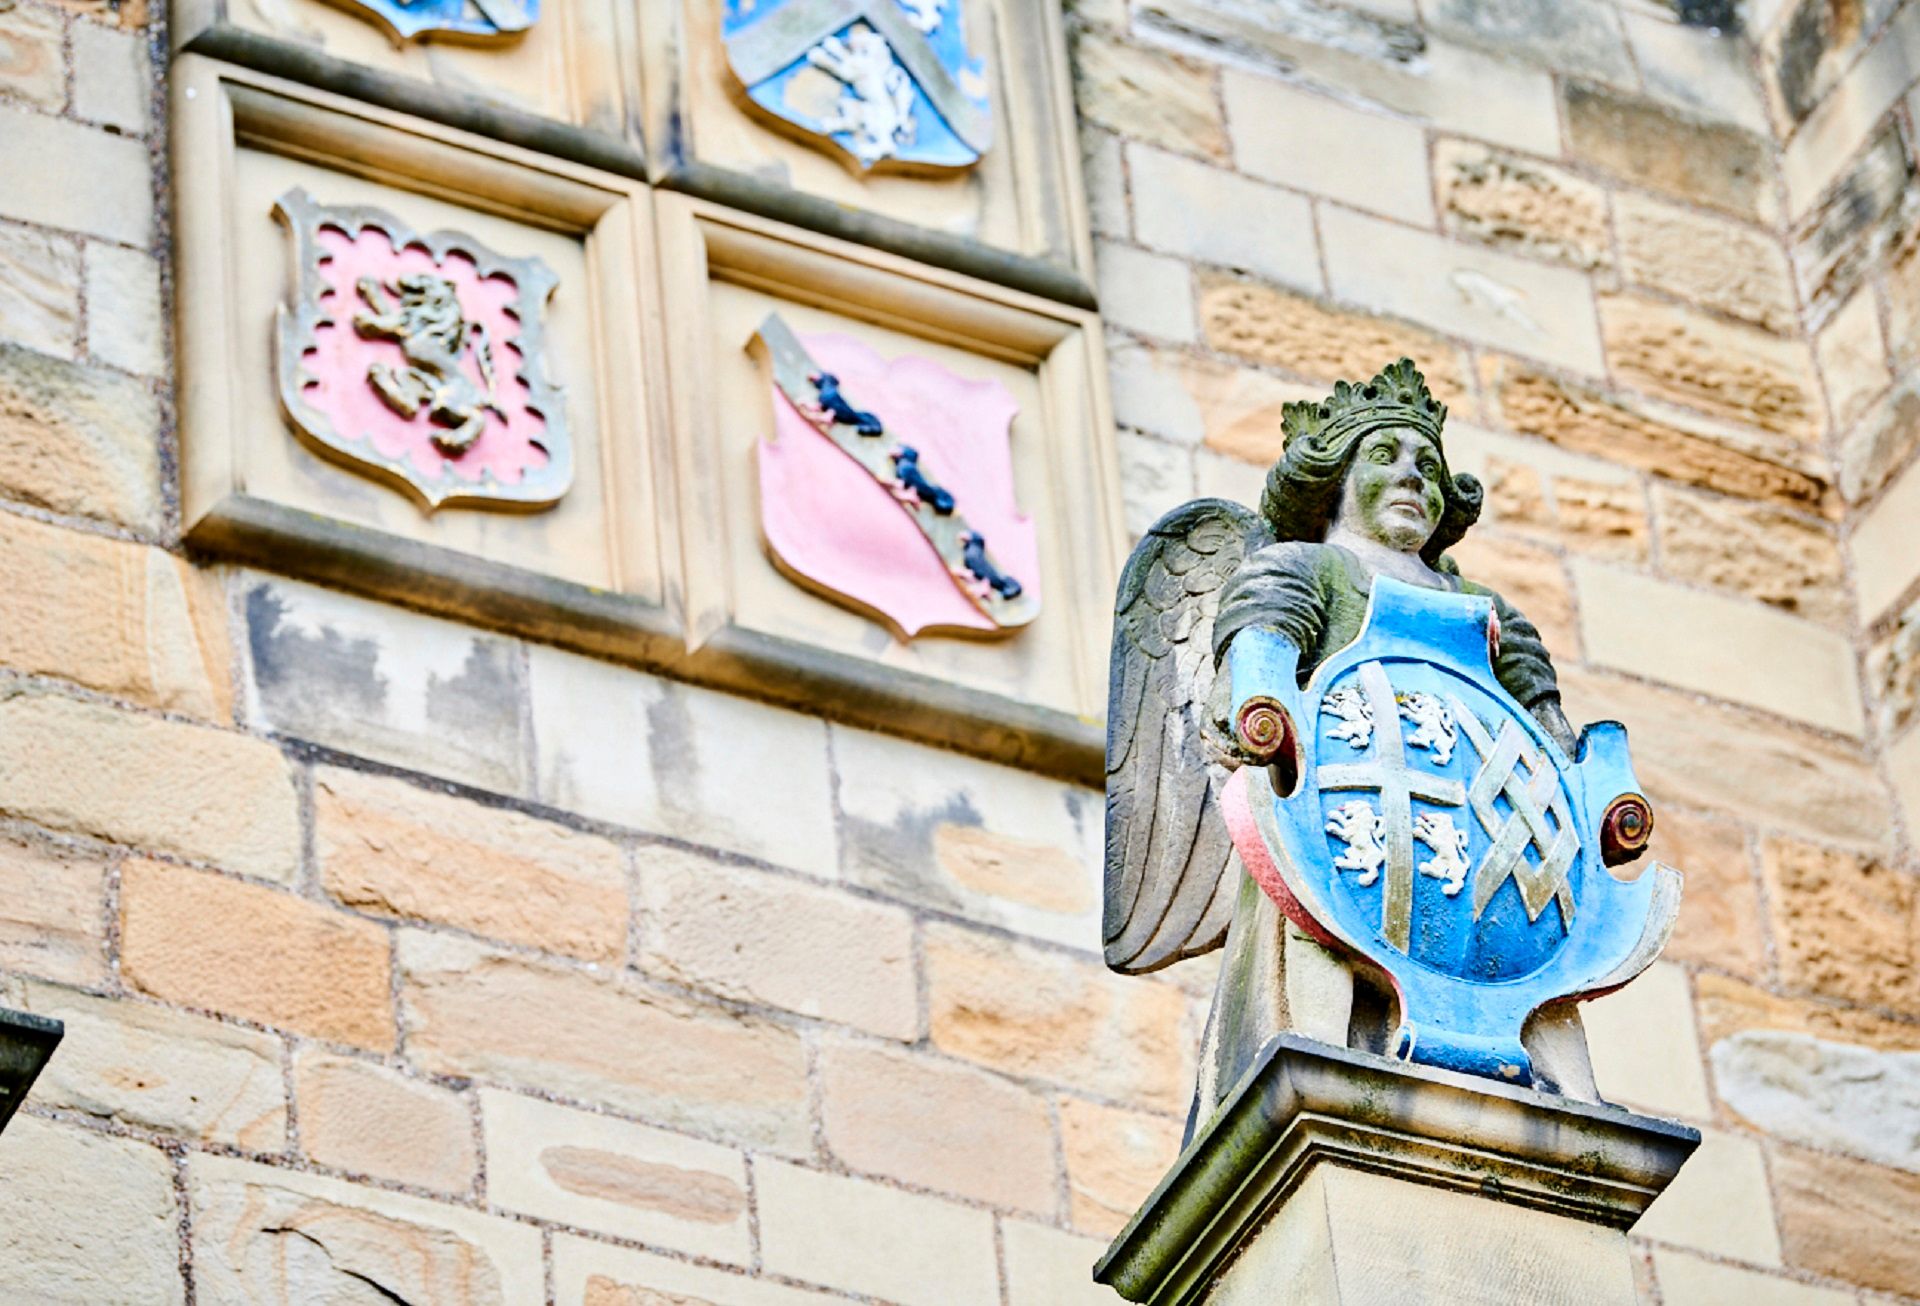 Above the entrance to the Great Hall. At the front is a crowned angel with the coat of arms of Bishop Cosin, with other coats of arms behind.